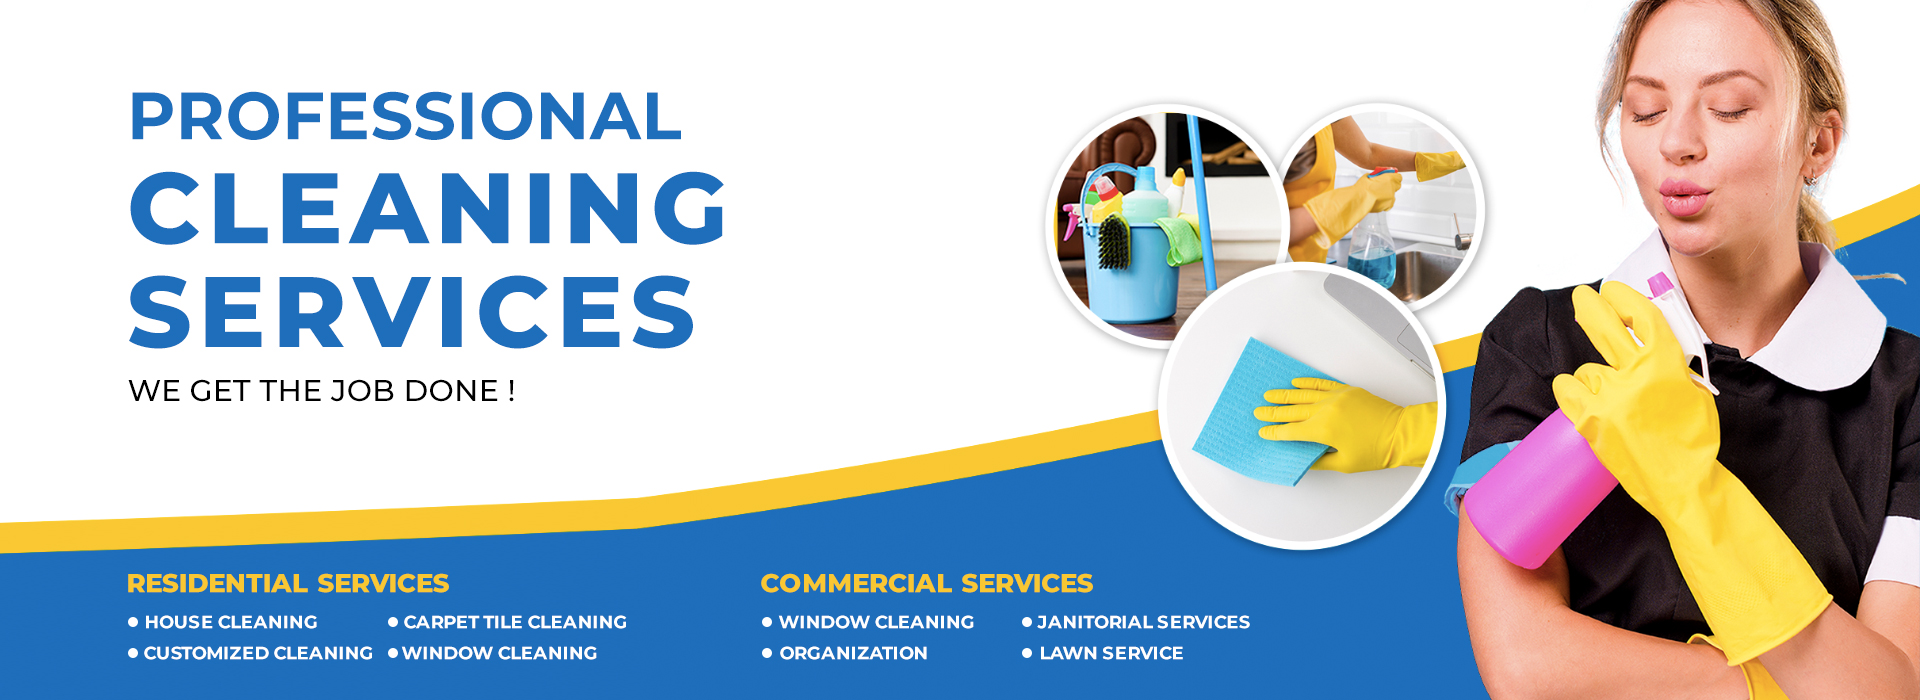 Maid services in Sharjah & Ajman